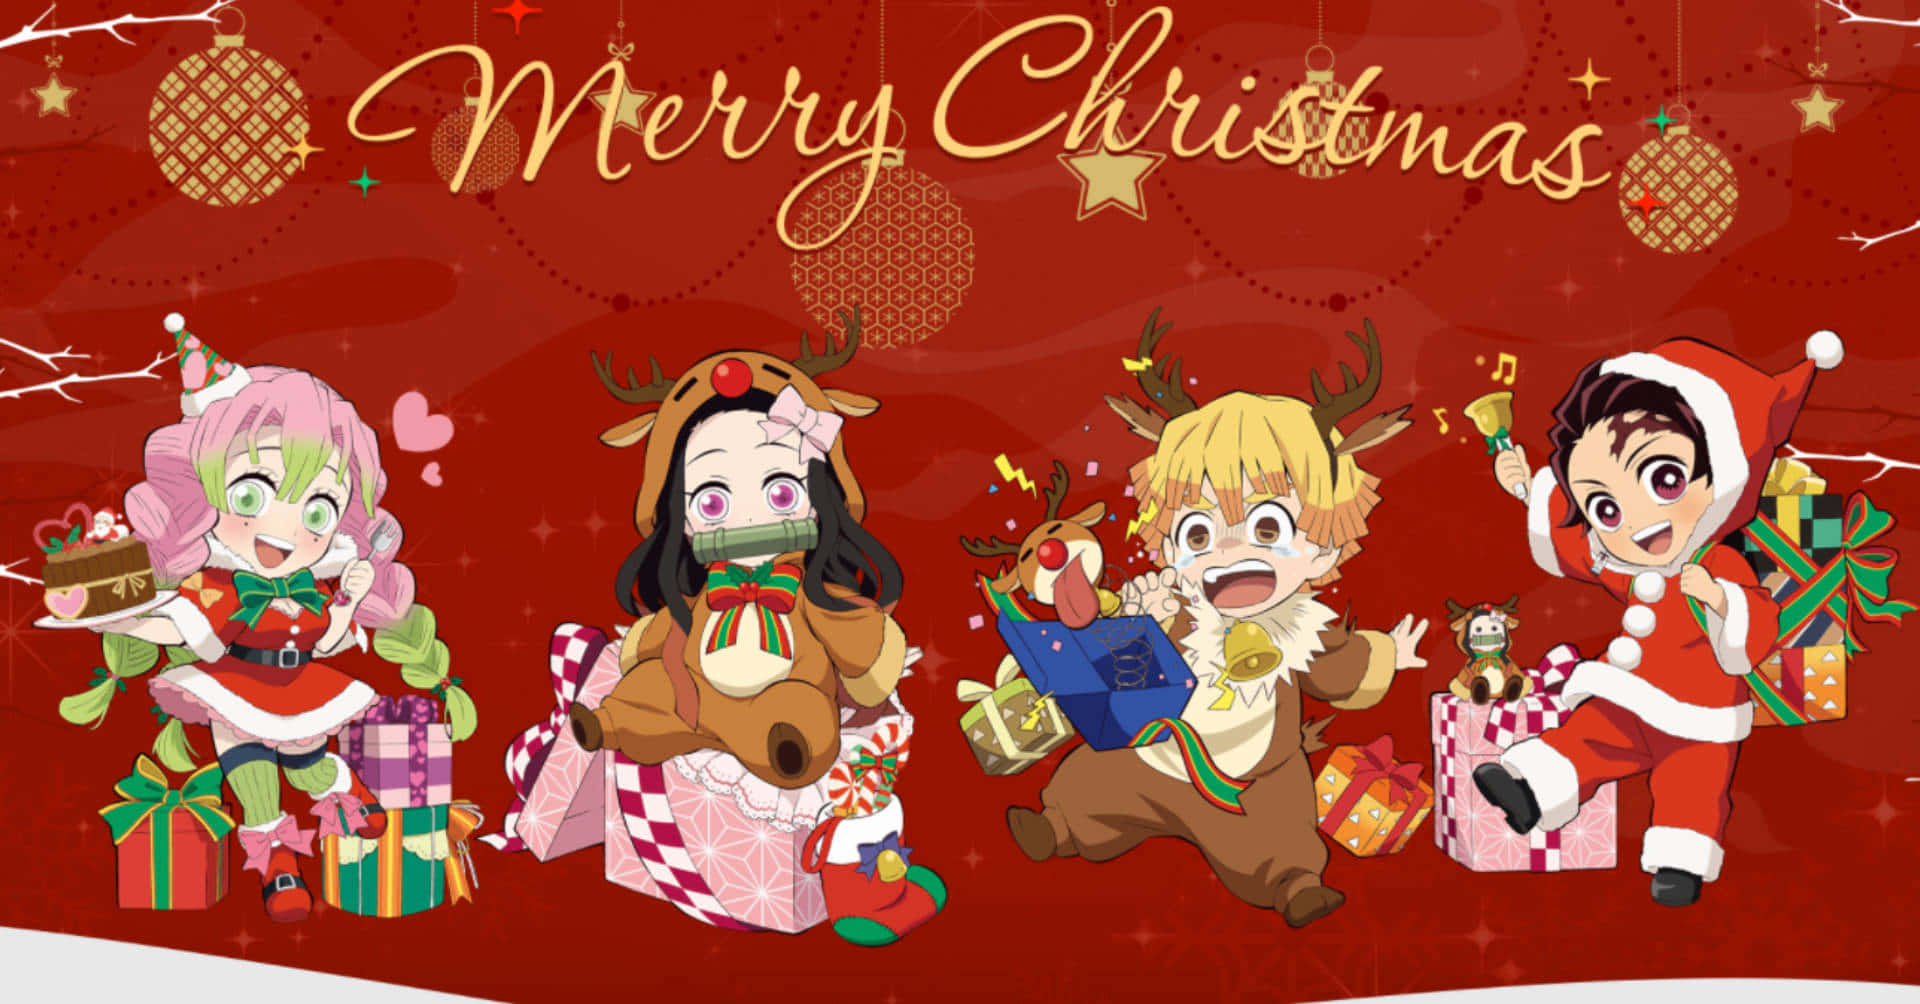 Happy Holidays! Enjoy the Anime Christmas season with your favorite characters!